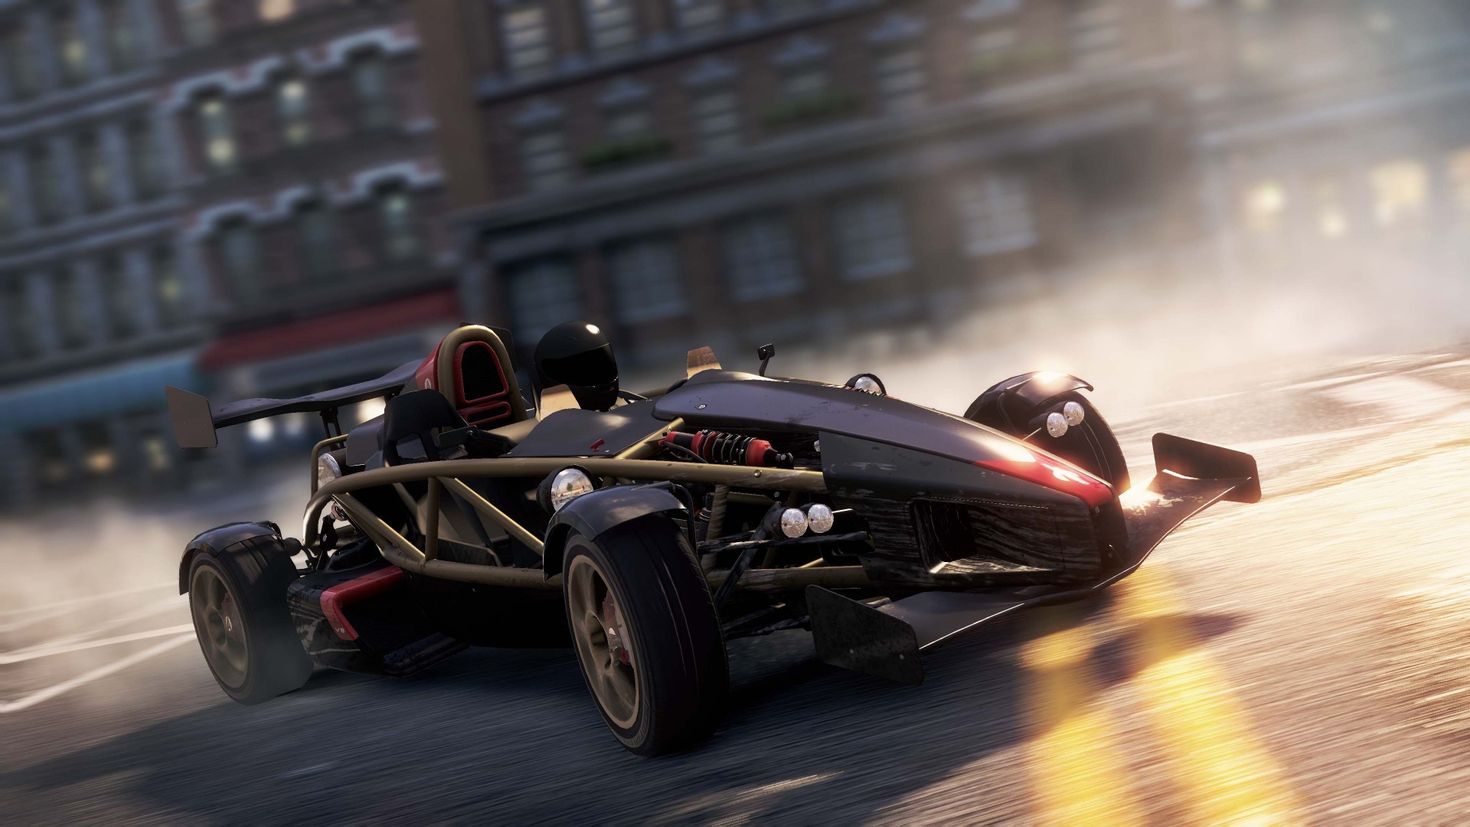 Need for Speed most wanted 2012 Ariel Atom